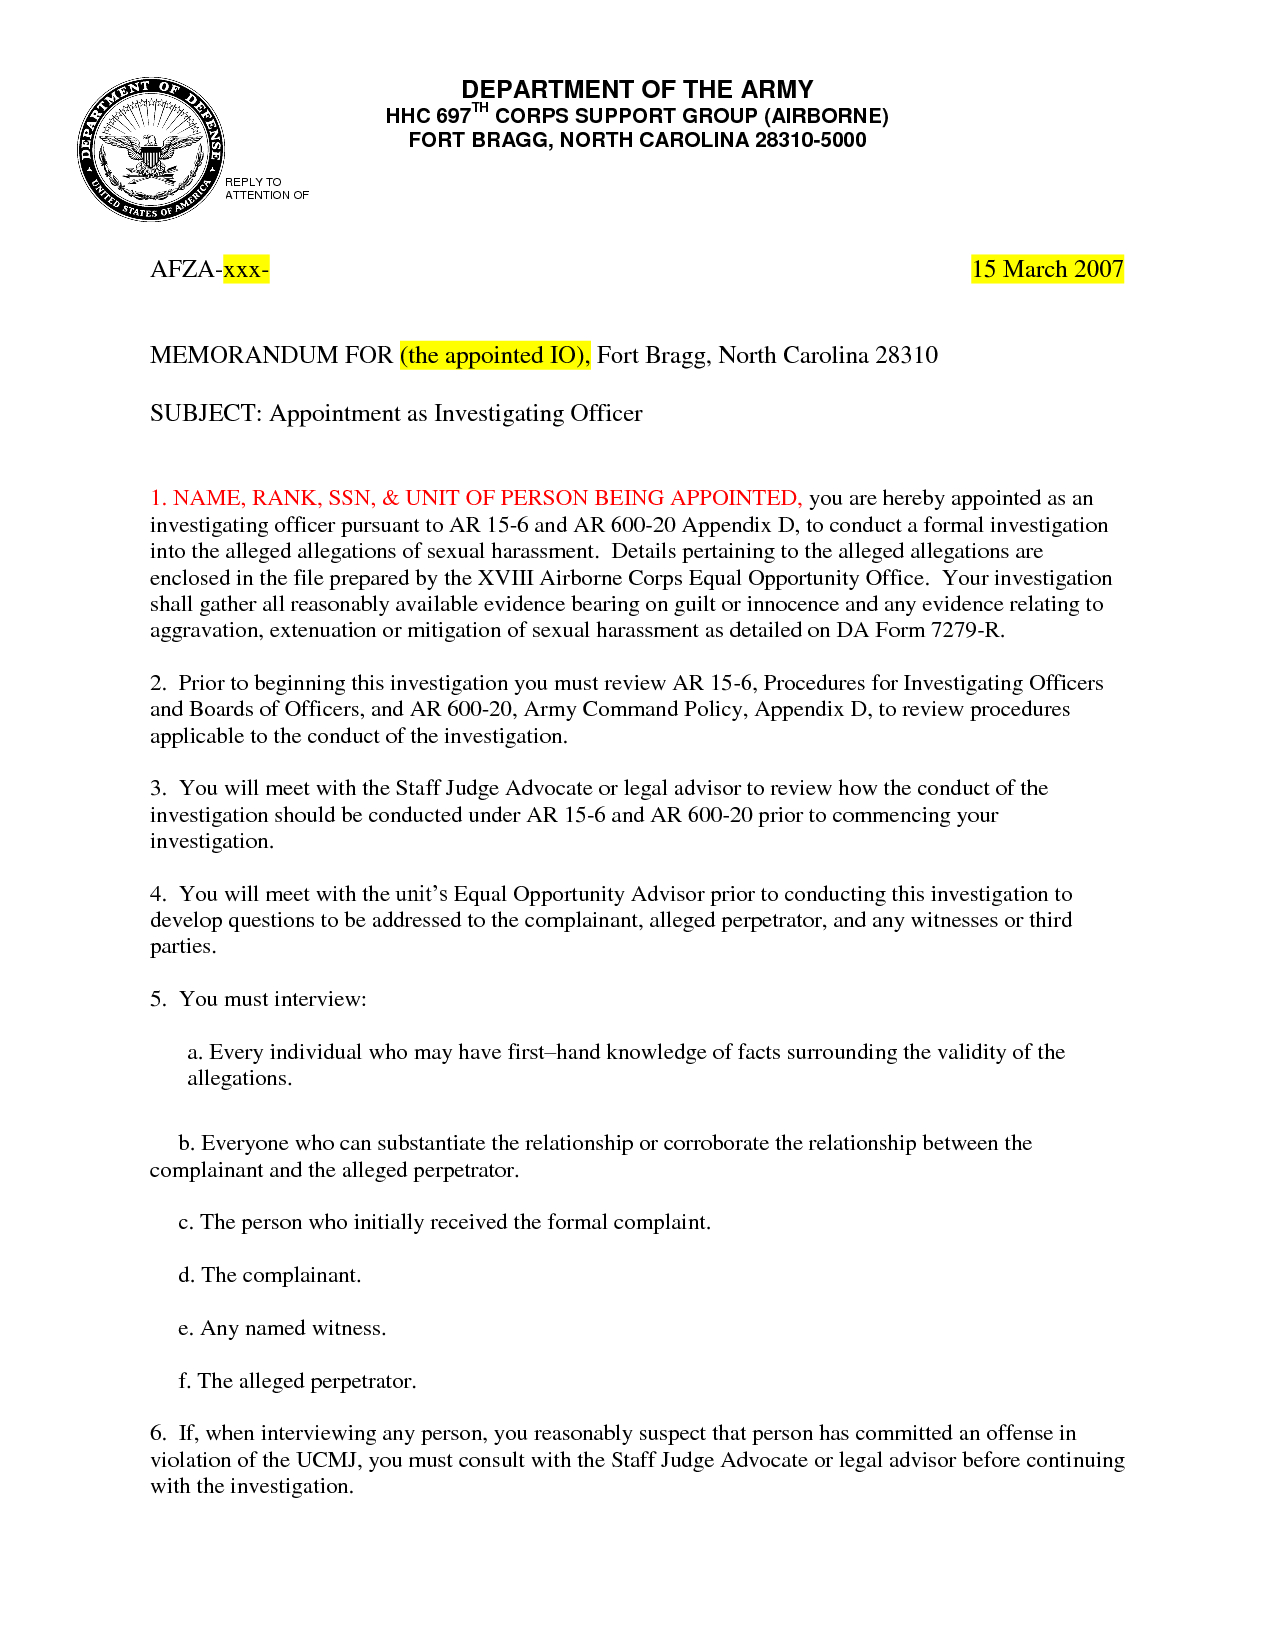 Army Memo Example Template | Free Cover Letter Templates Throughout Army Memorandum Template Word